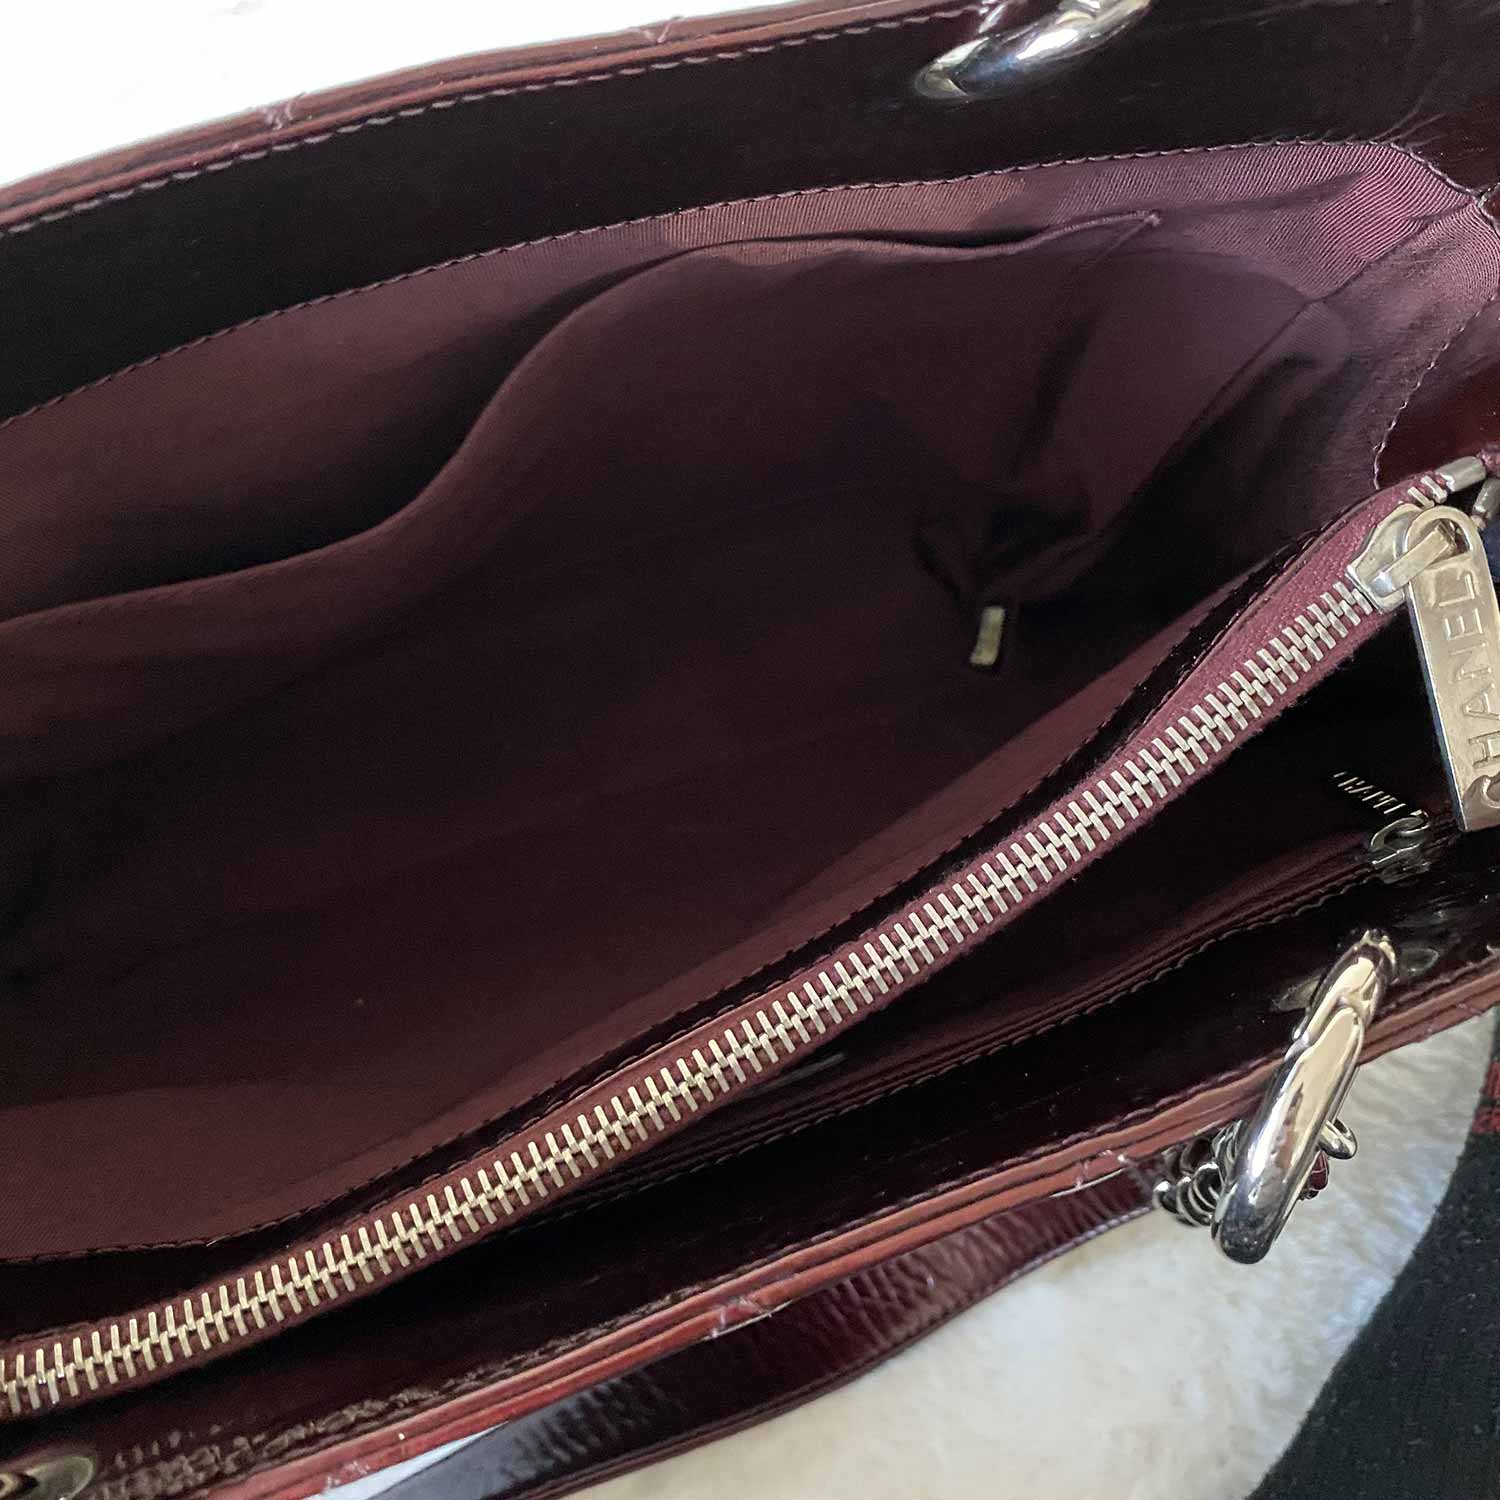 Chanel Wine Red Patent Leather Grand Shopping Tote Handbag